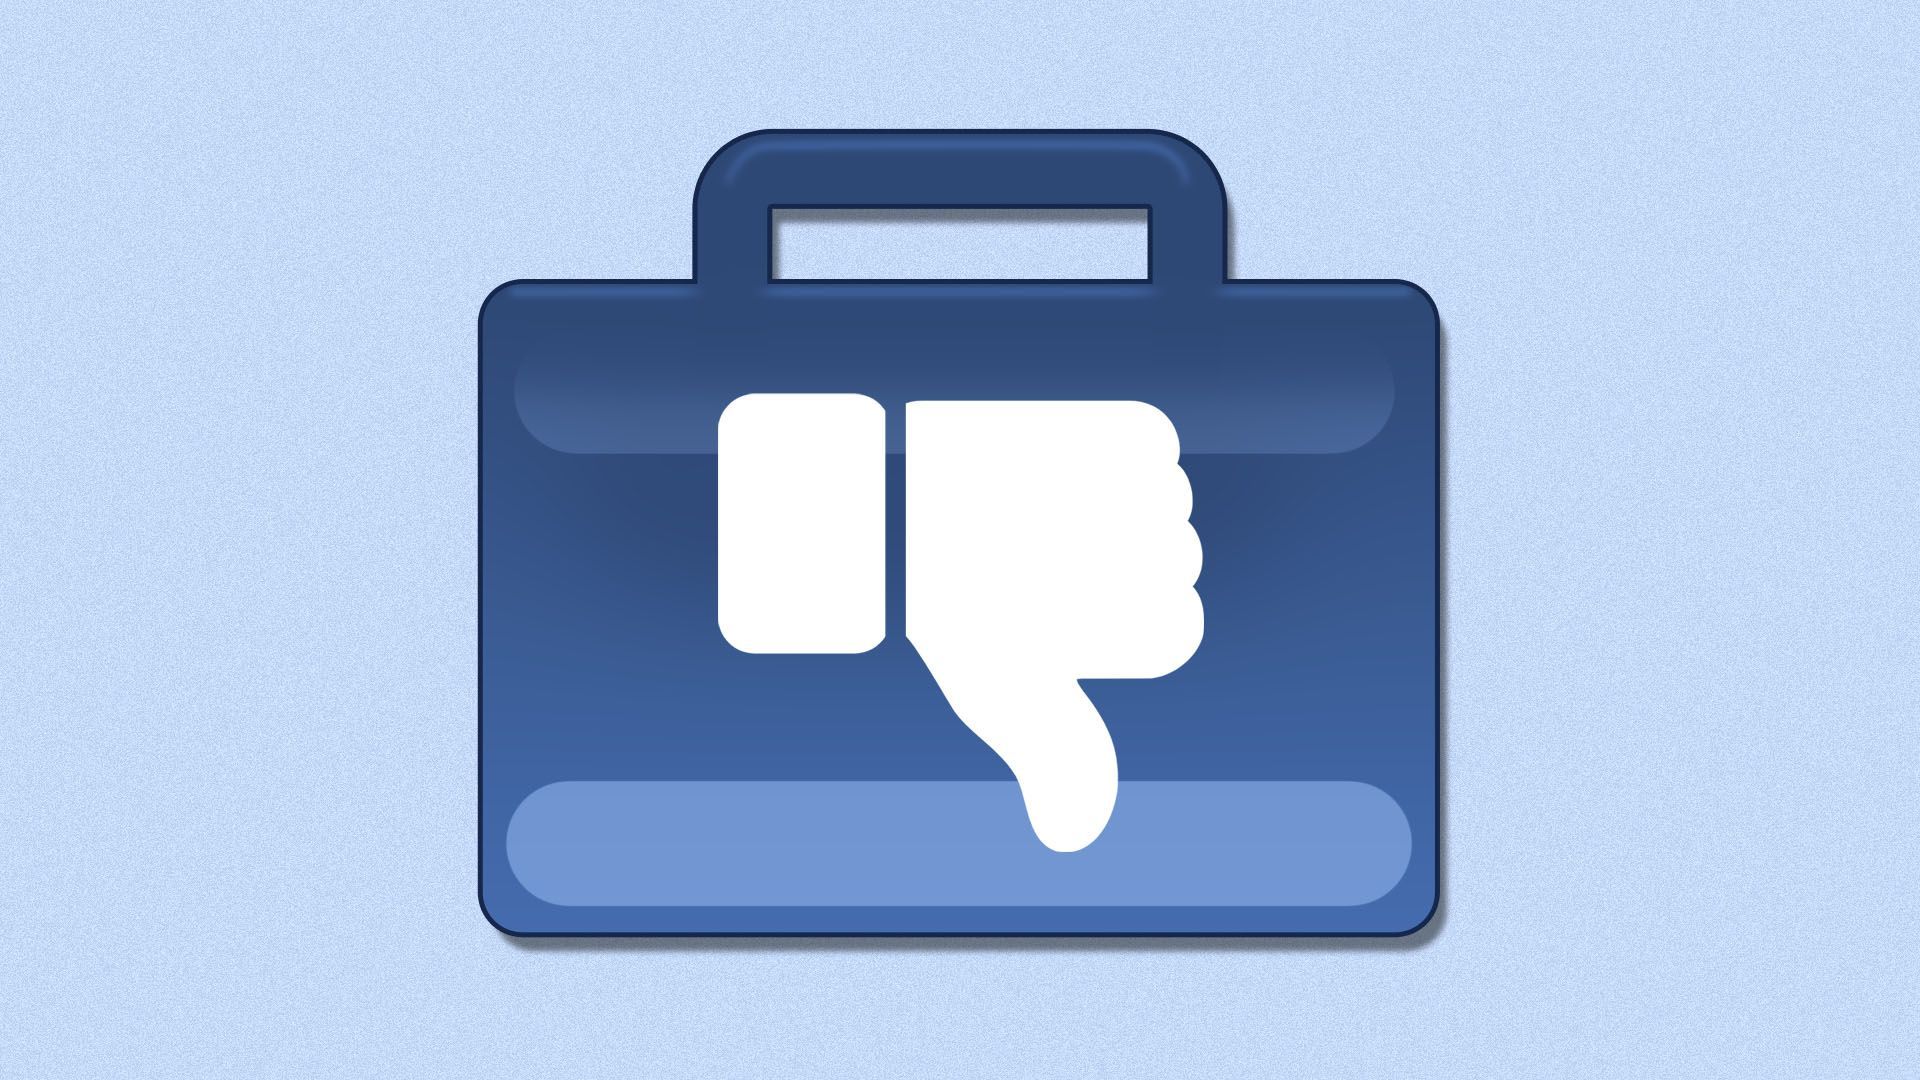 Illustration of a facebook like icon shaped like a briefcase with a thumb pointing down